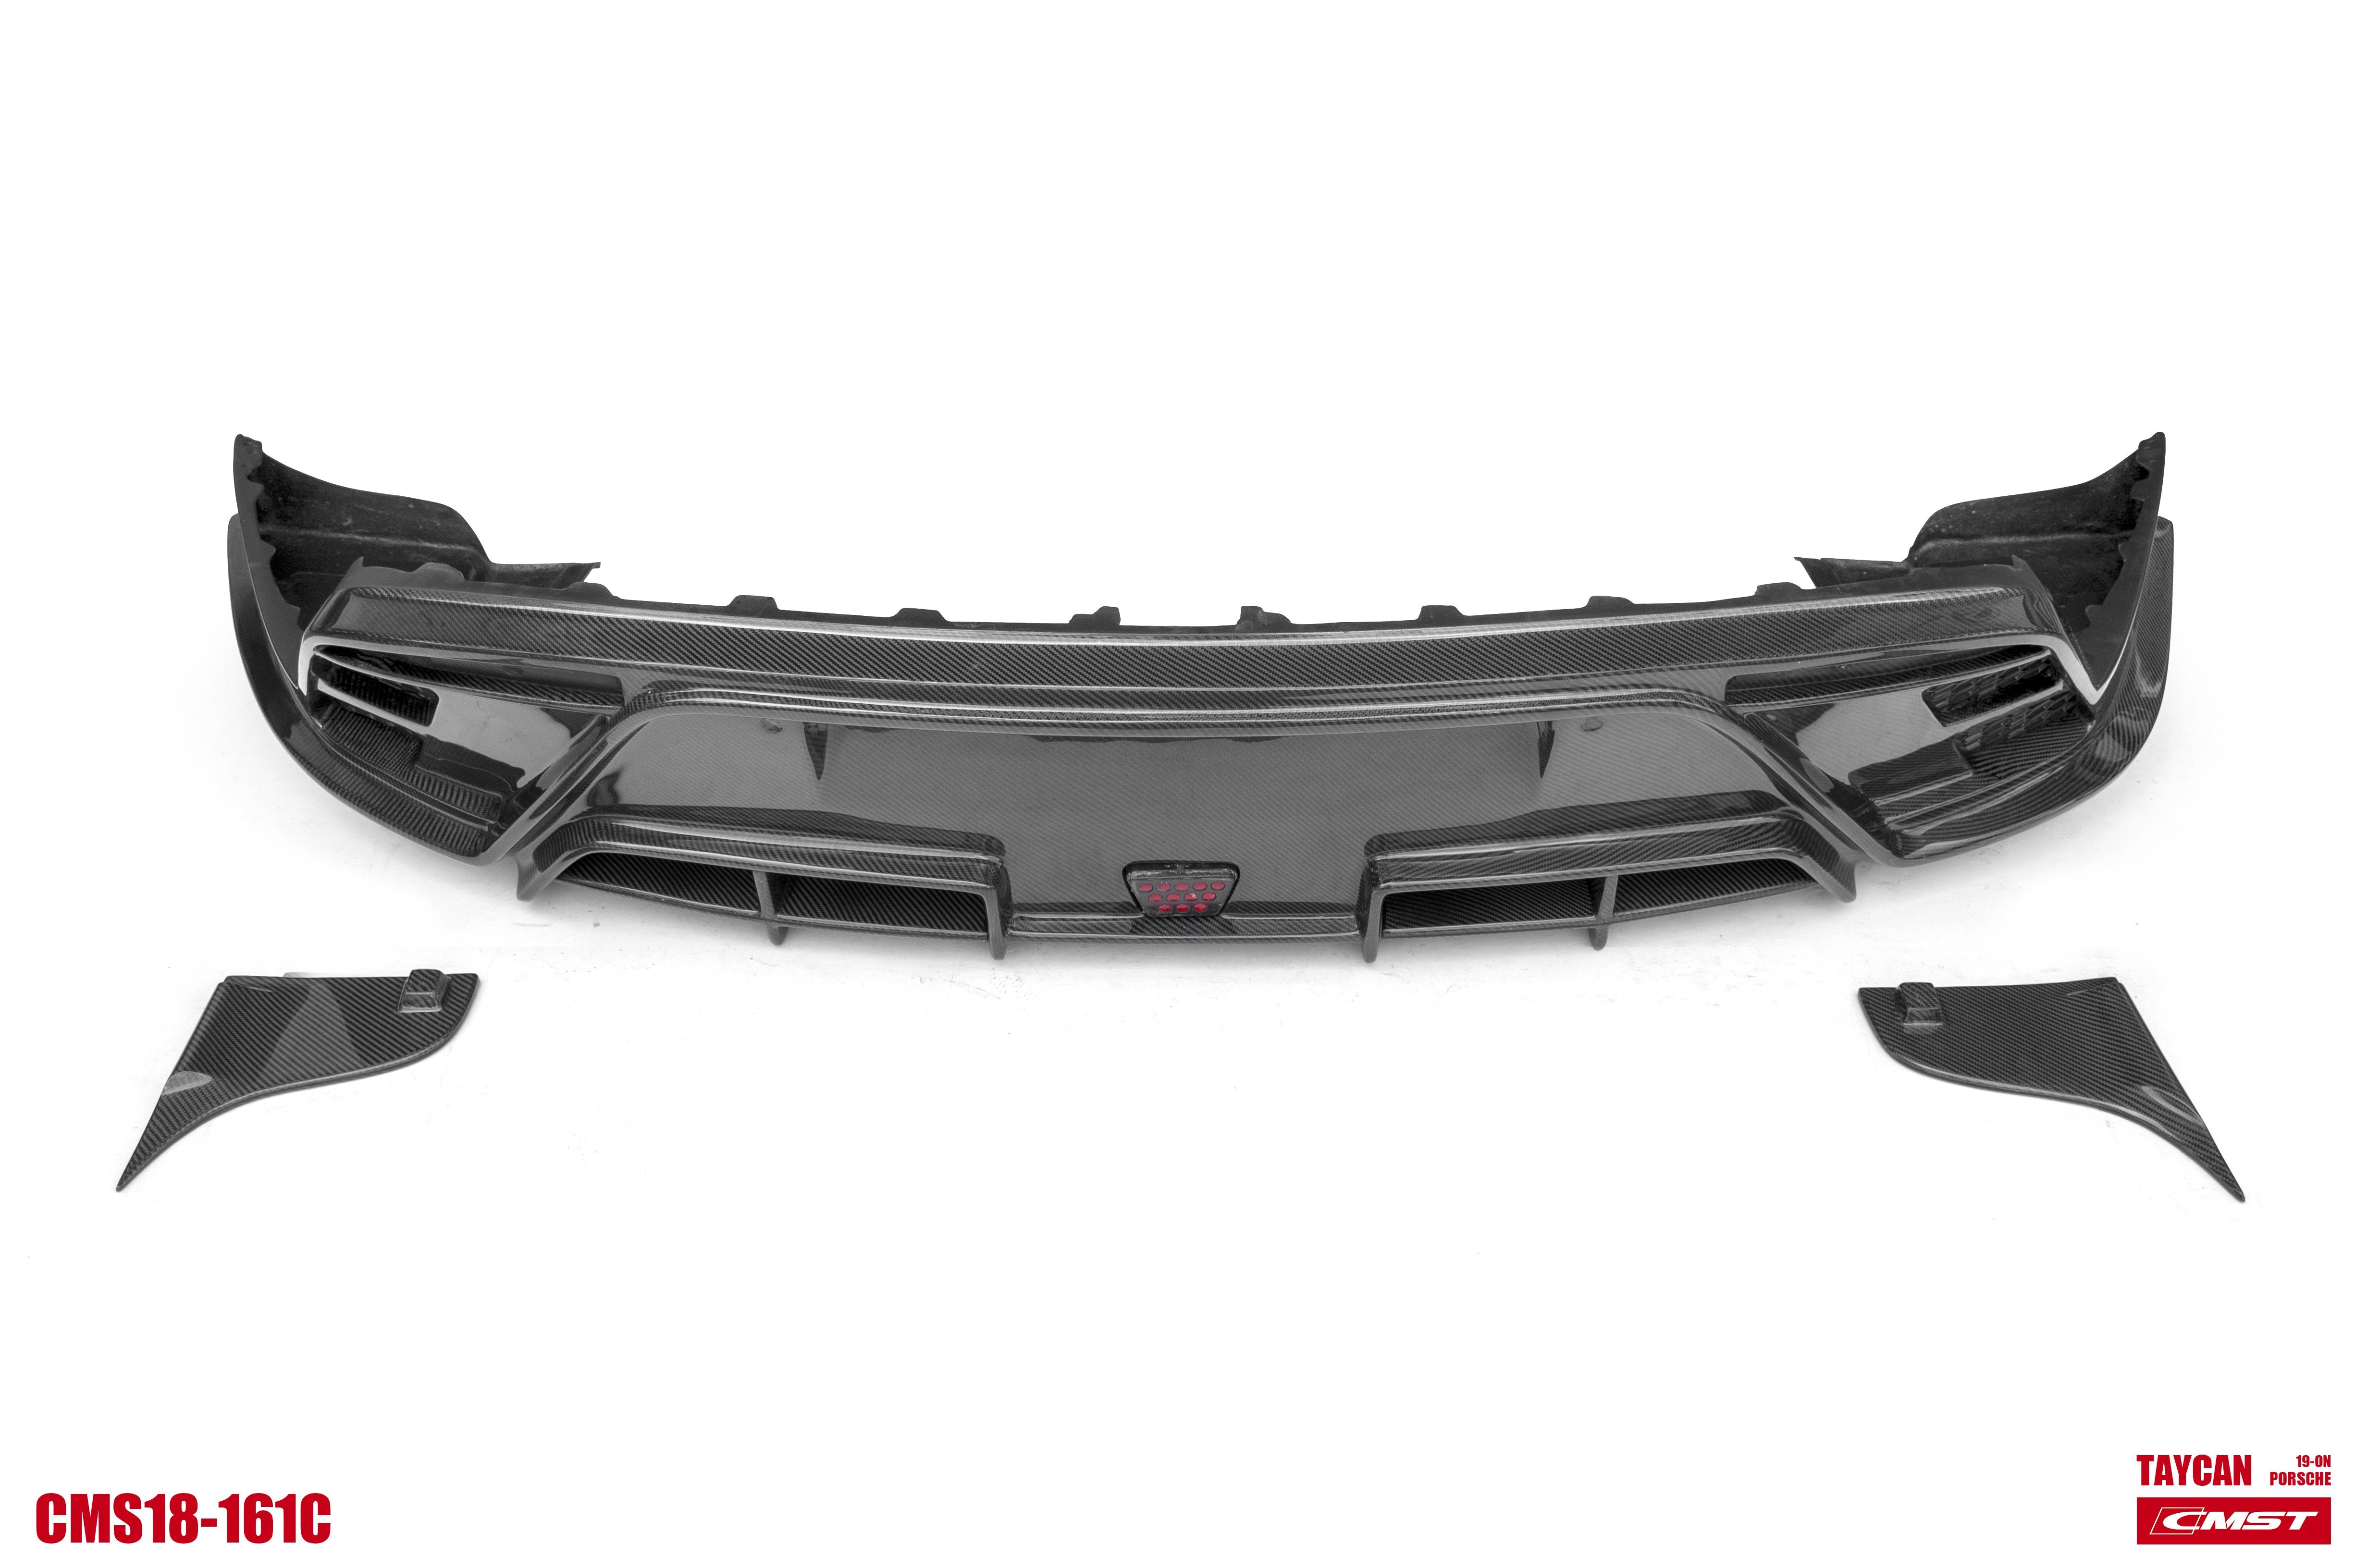 CMST Tuning Carbon Fiber Rear Diffuser & Canards for Porsche Taycan Base & 4S